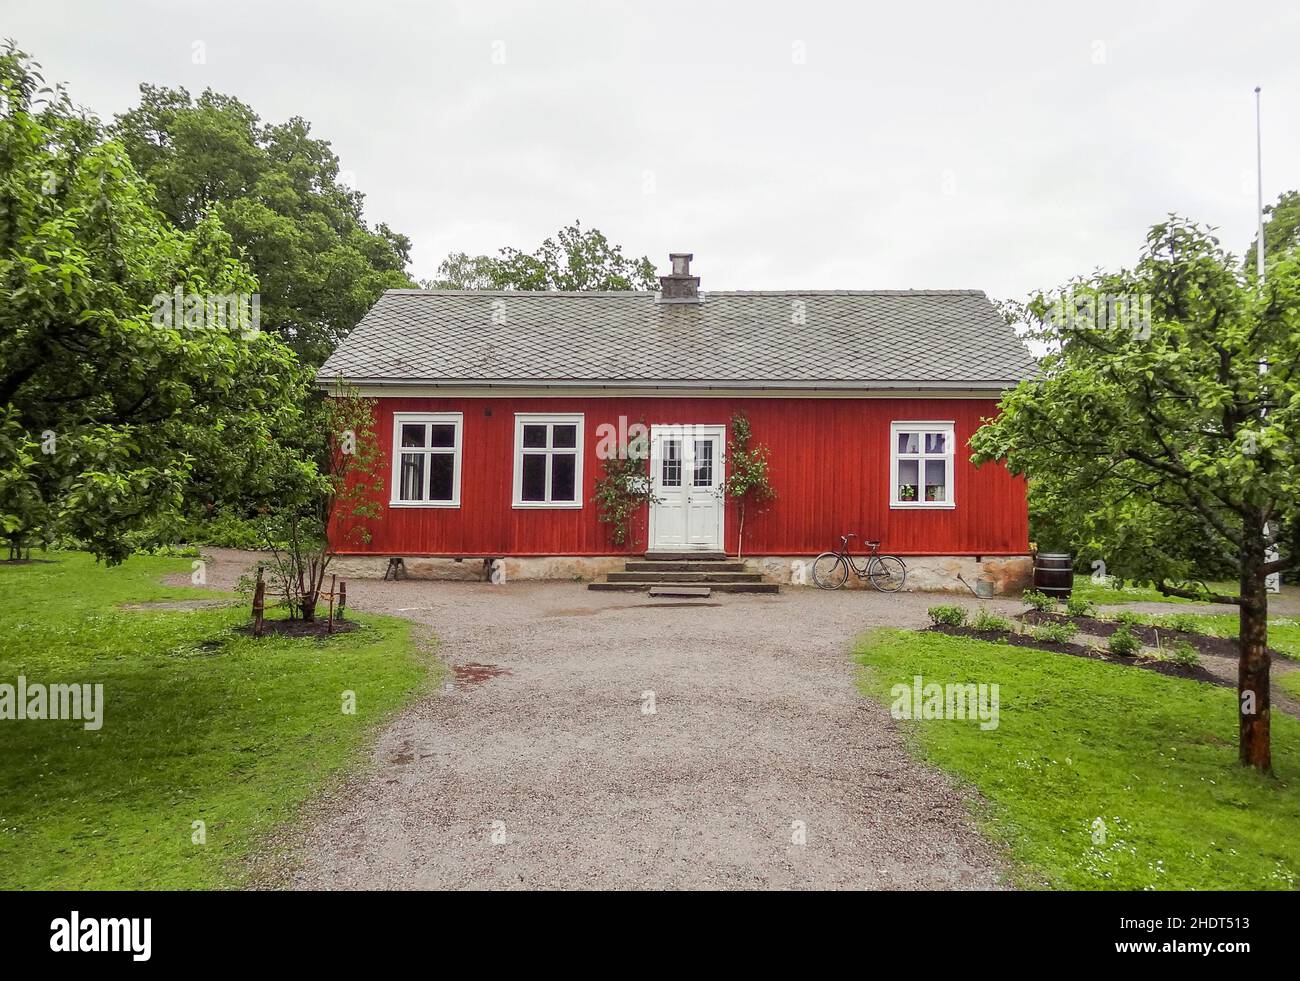 wooden house, sweden, wooden houses, swedens Stock Photo